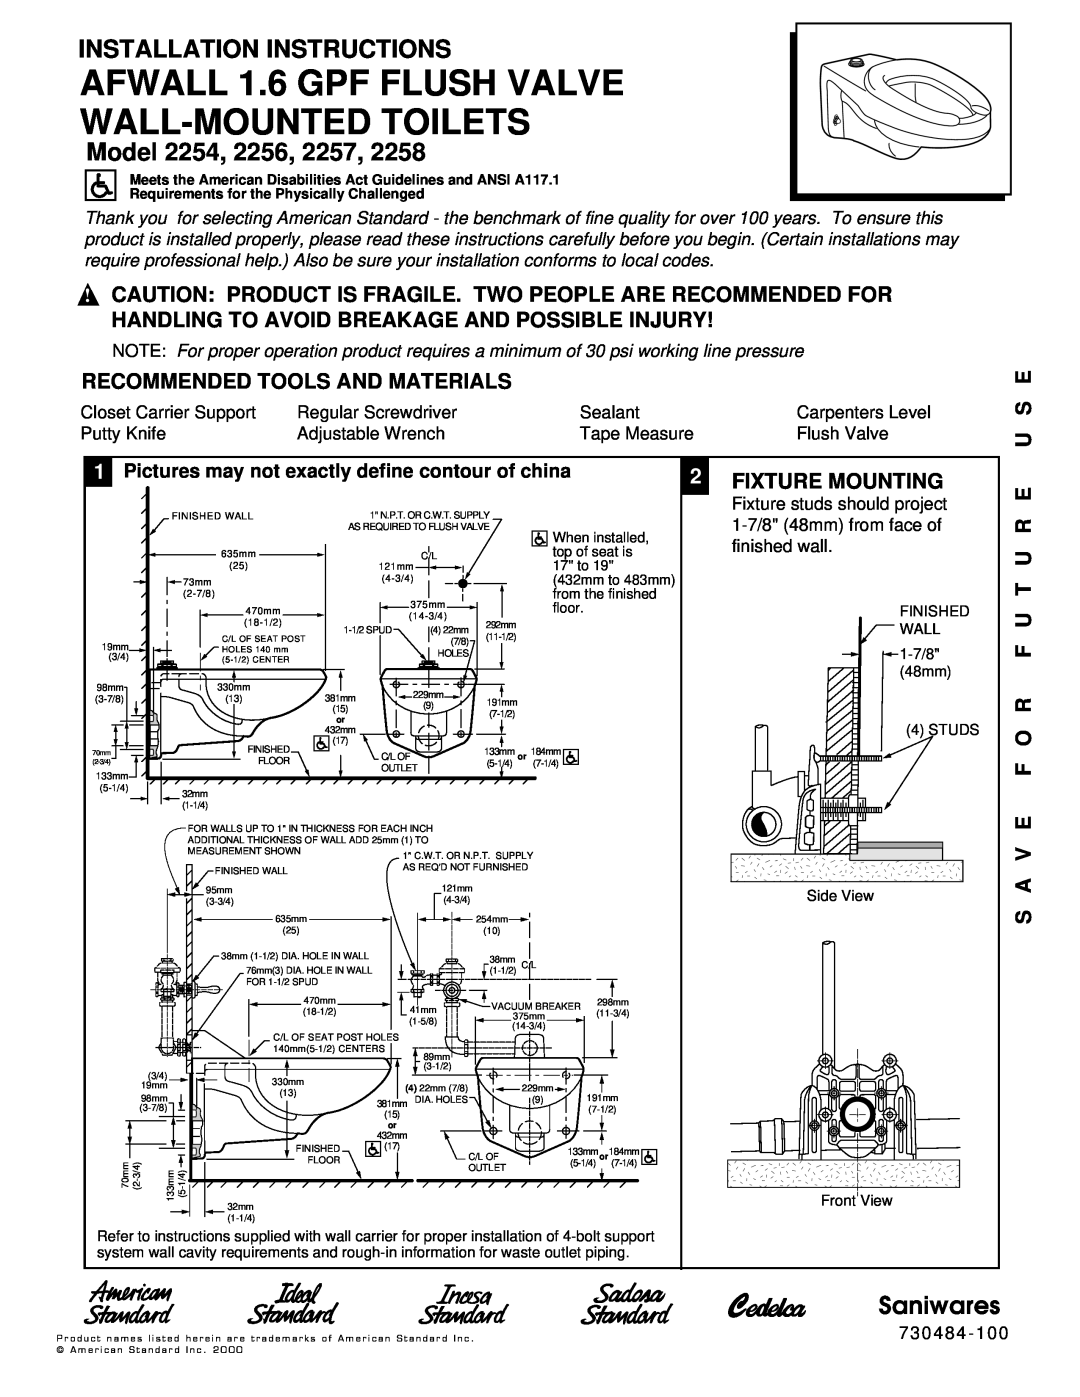 American Standard 2258, 2254 installation instructions Recommended Tools And Materials, U S E, 2FIXTURE MOUNTING, Model 